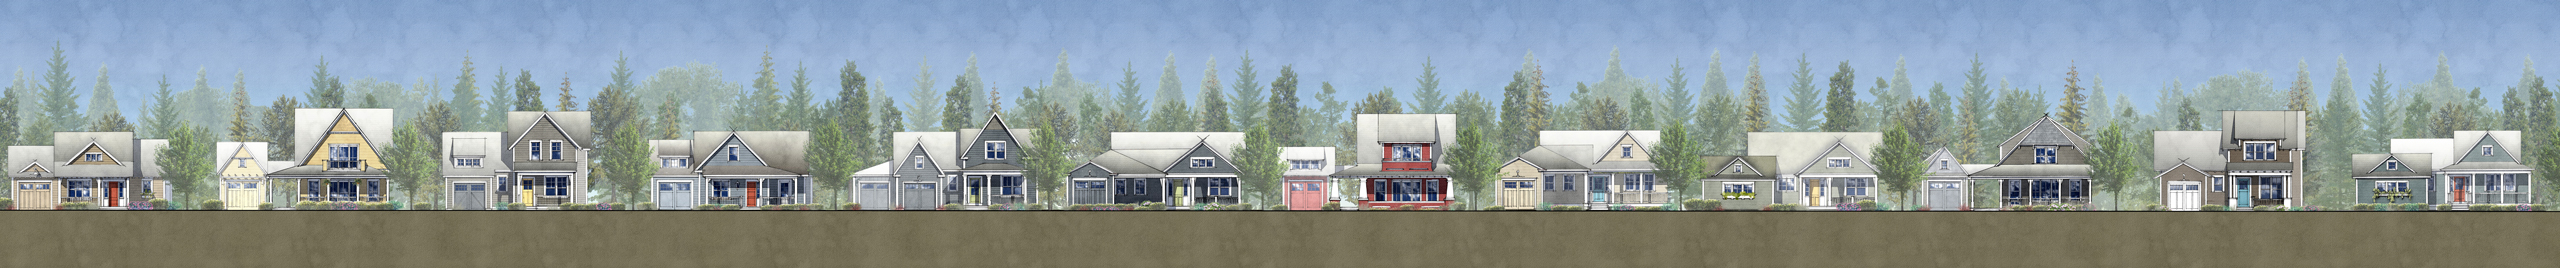 Streetscape elevation drawing of cottages